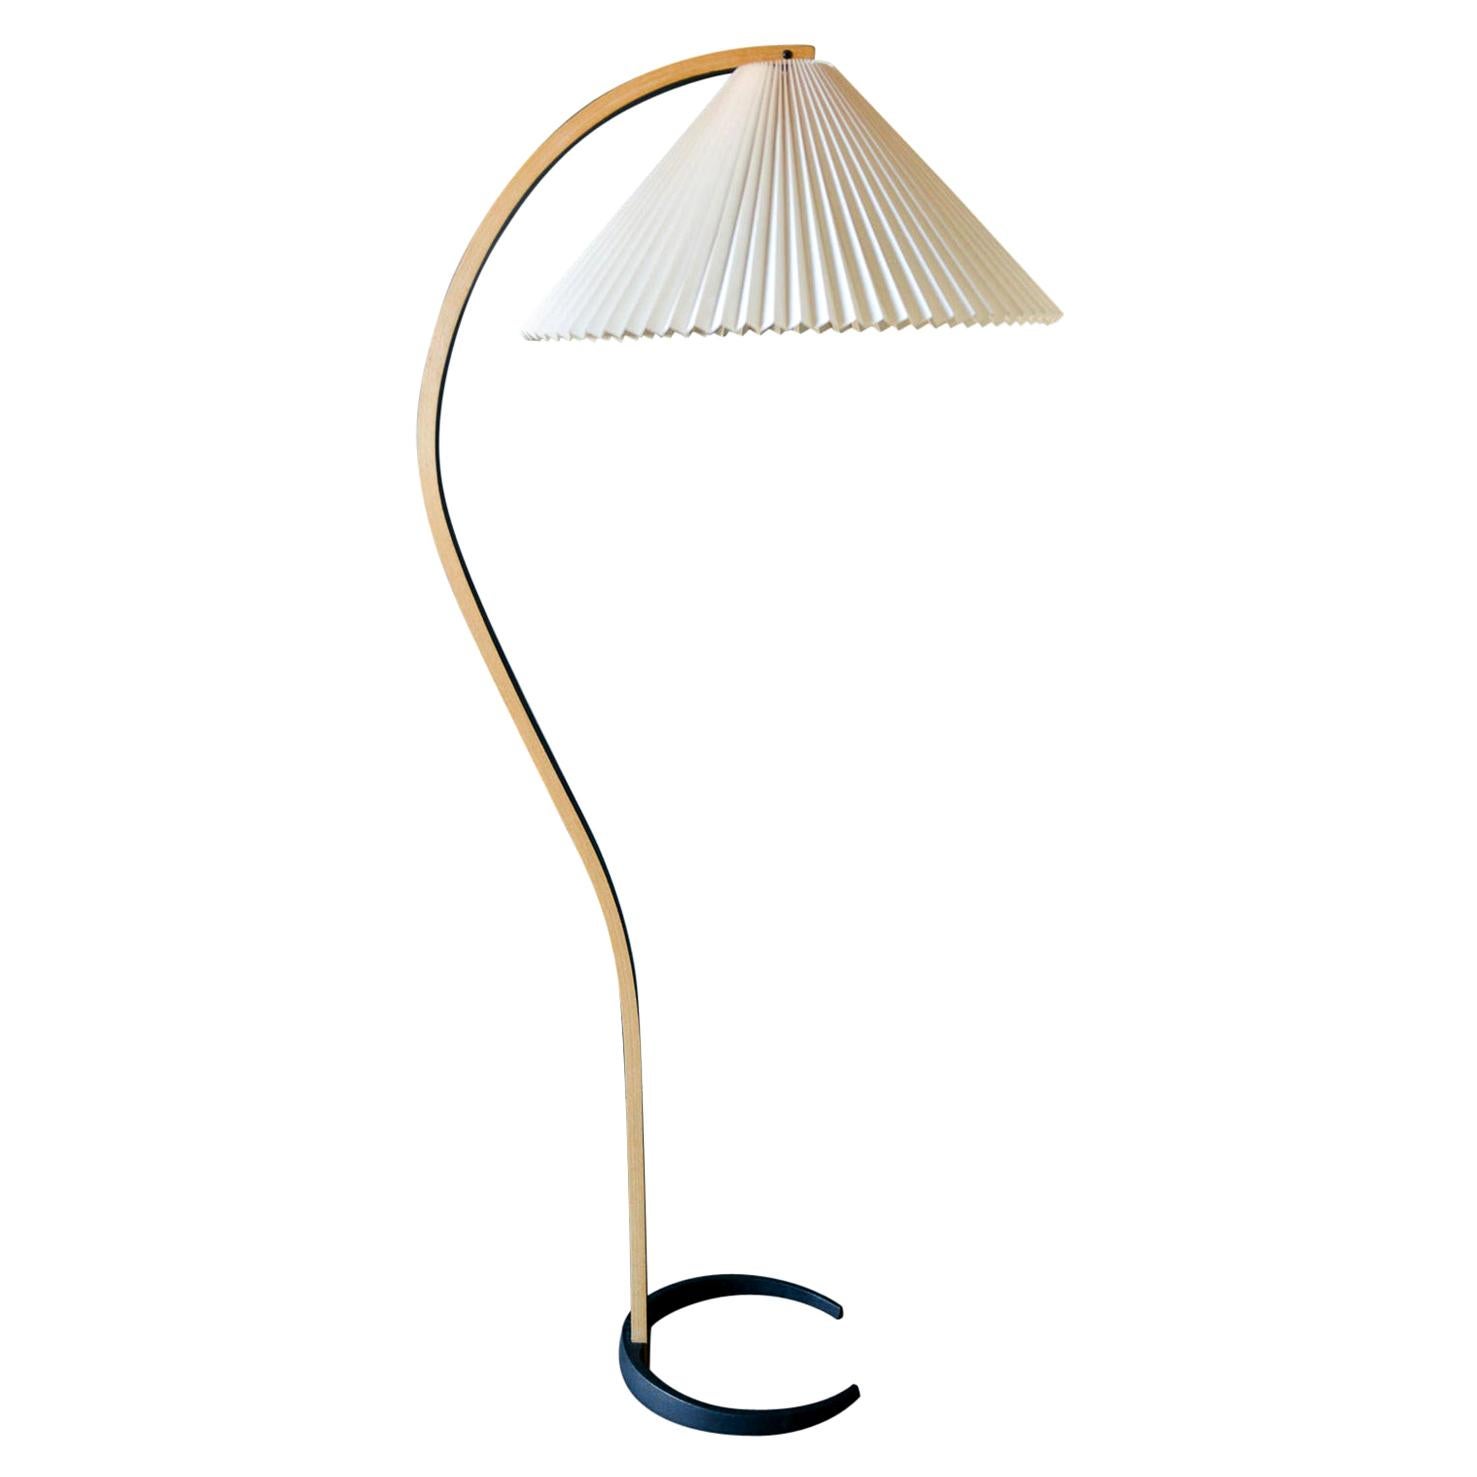 Bentwood Floor Lamp by Mads Caprani of Denmark, circa 1971